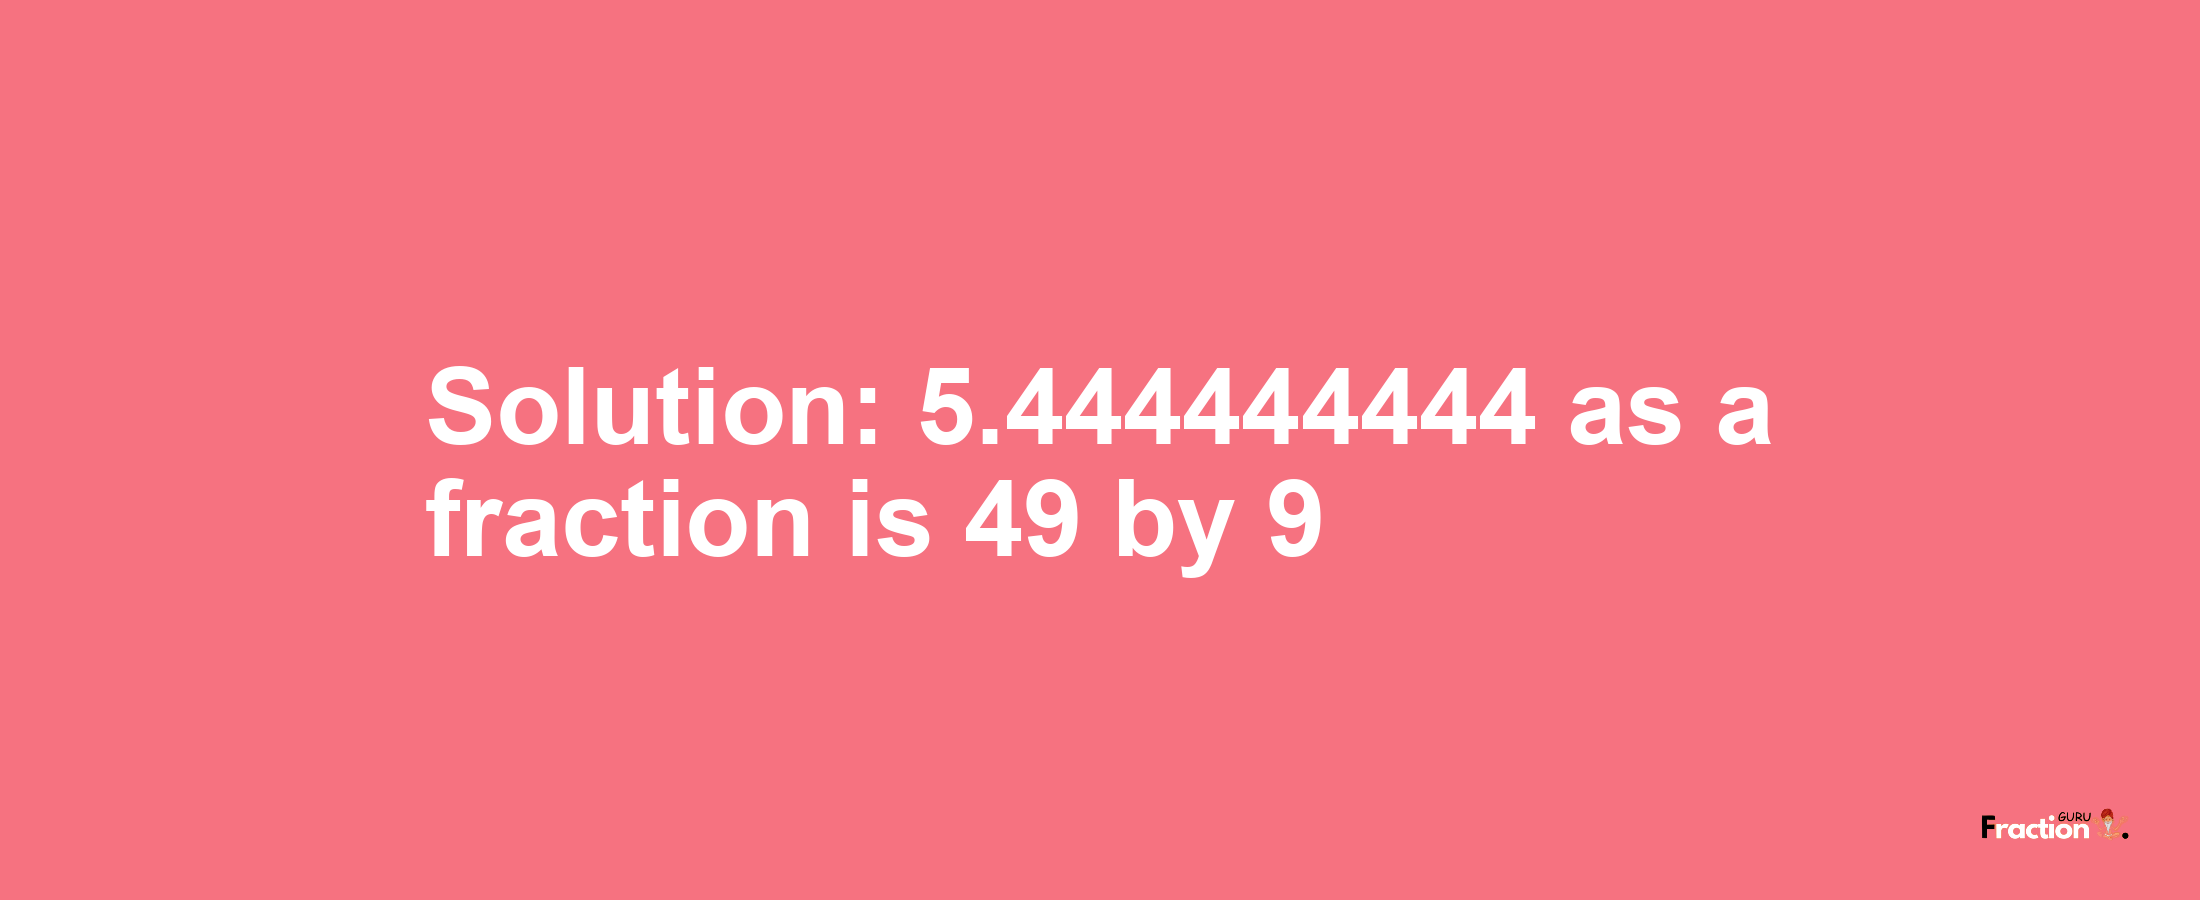 Solution:5.444444444 as a fraction is 49/9